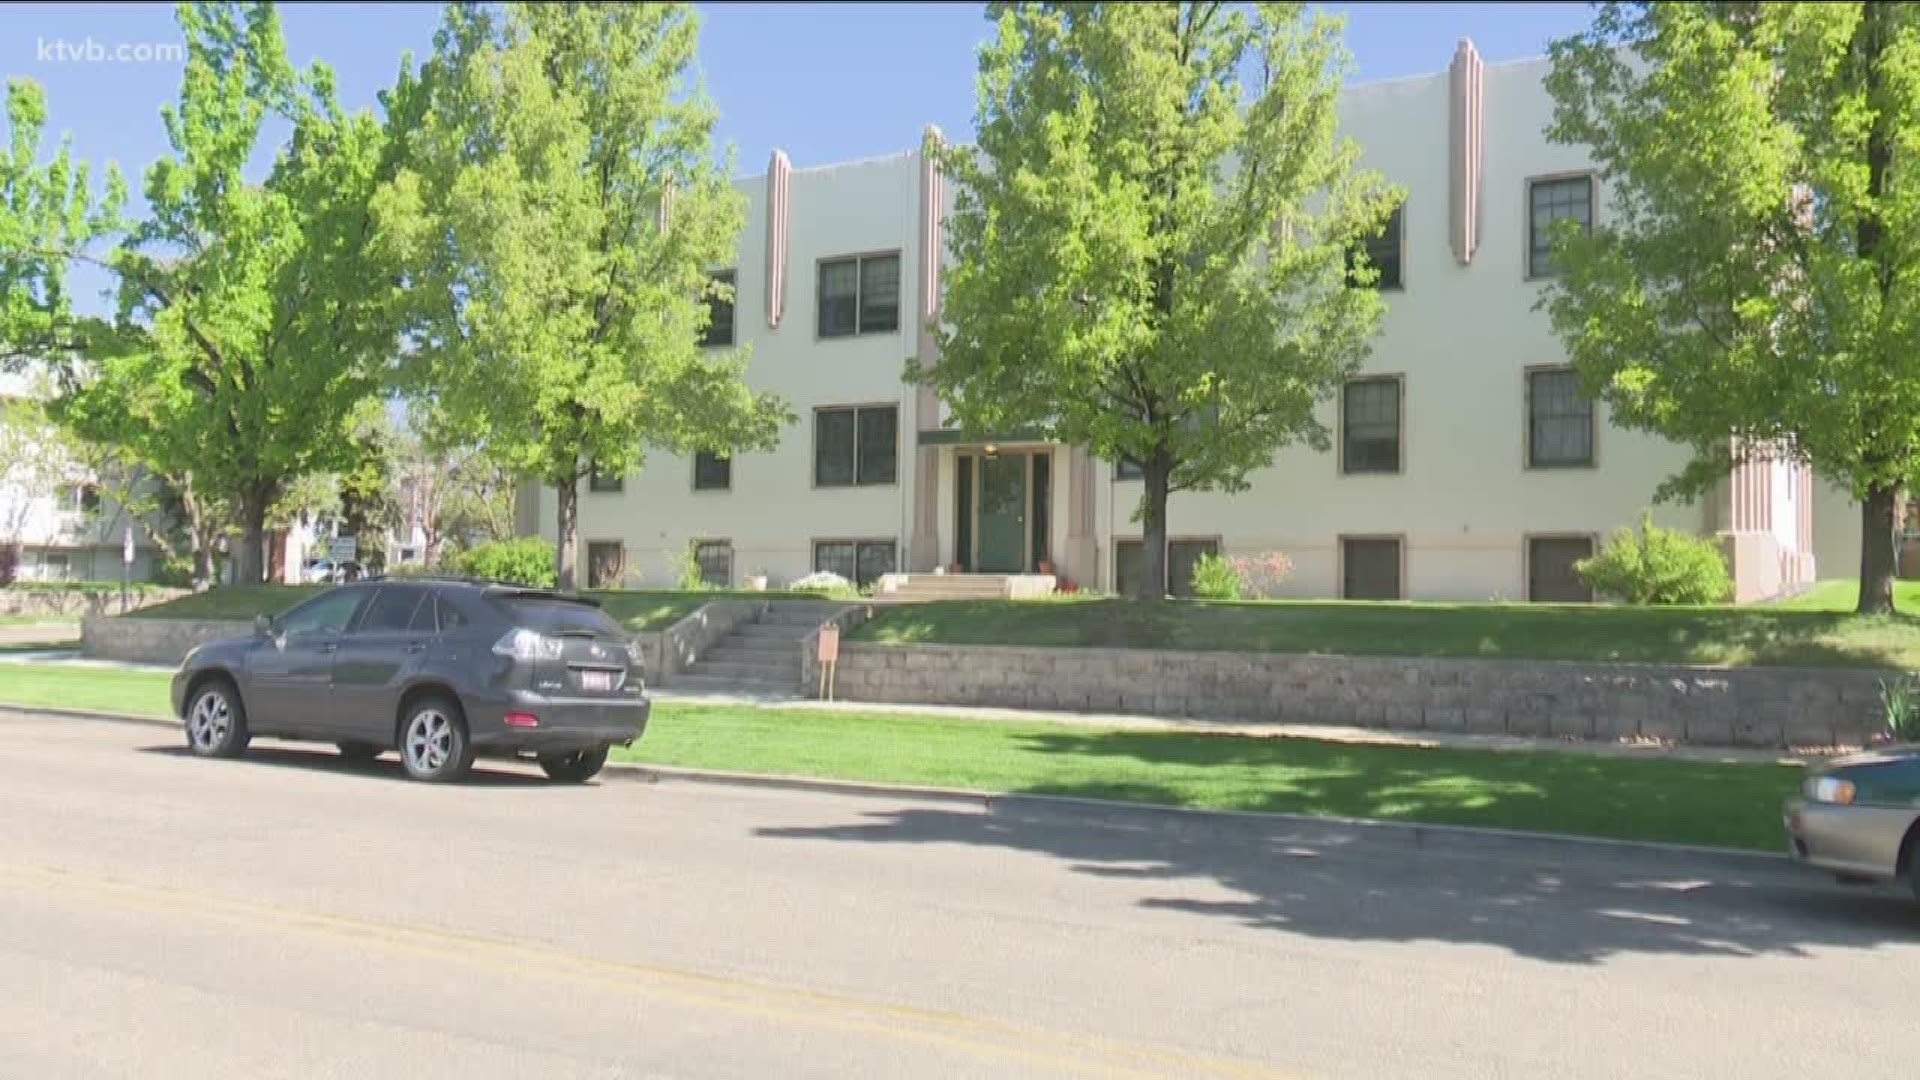 Boise Planning and Zoning on Monday night rejected a proposal to rezone the Travis Apartments on West Bannock Street to make way for a newer apartment building that would include condominiums.